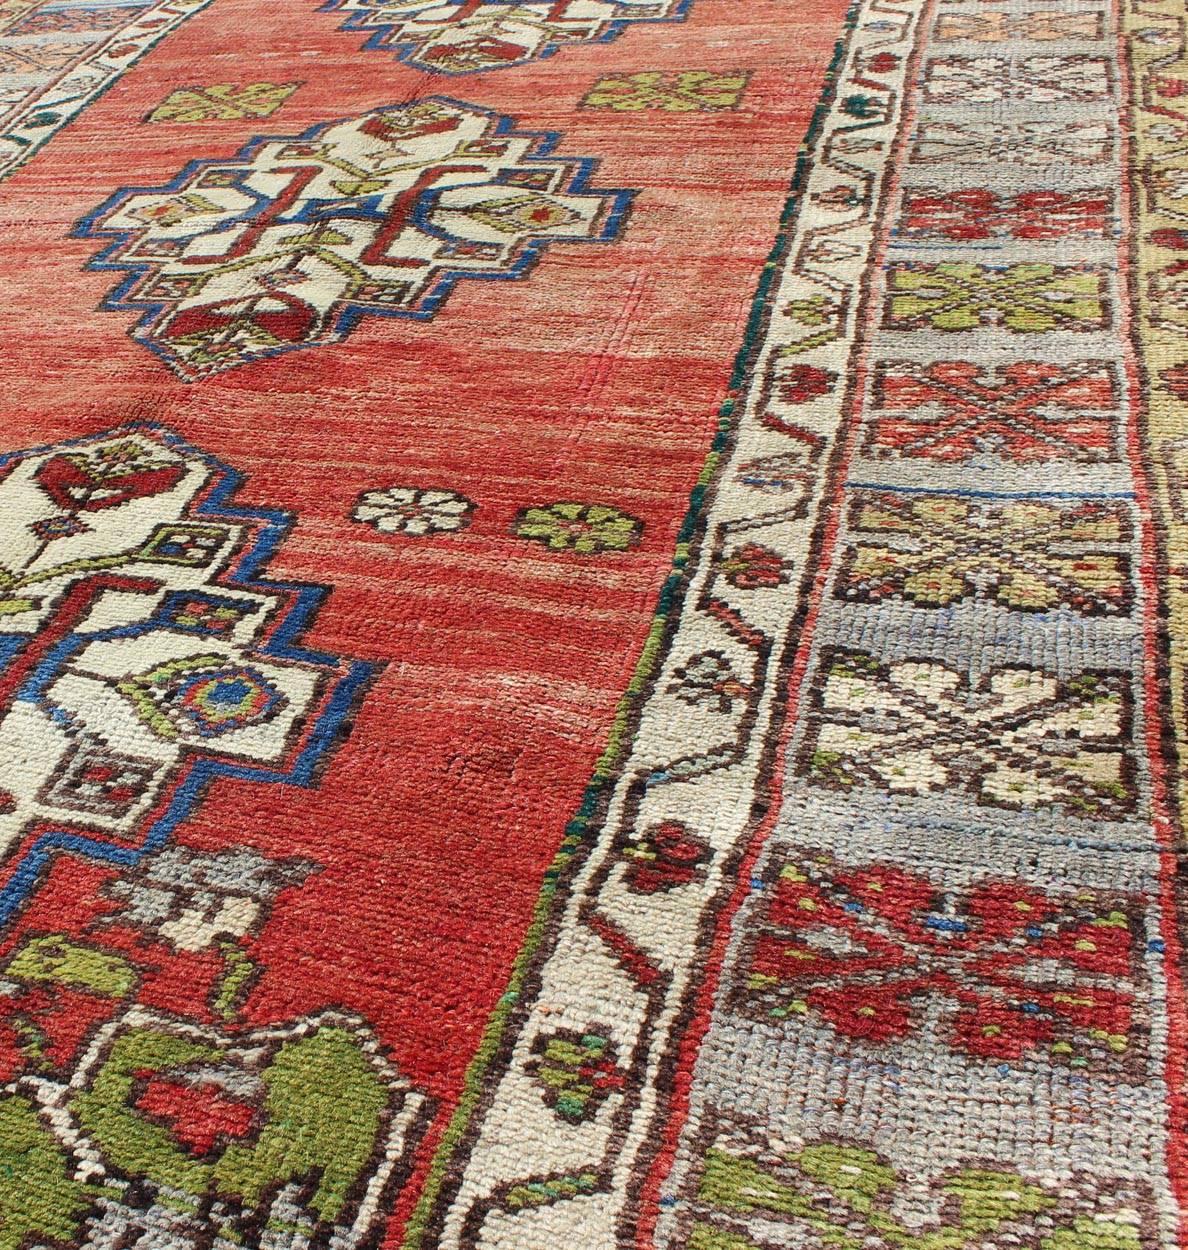 Mid-20th Century Green, Blue and Red Vintage Turkish Oushak Rug with Three Geometric Medallions For Sale